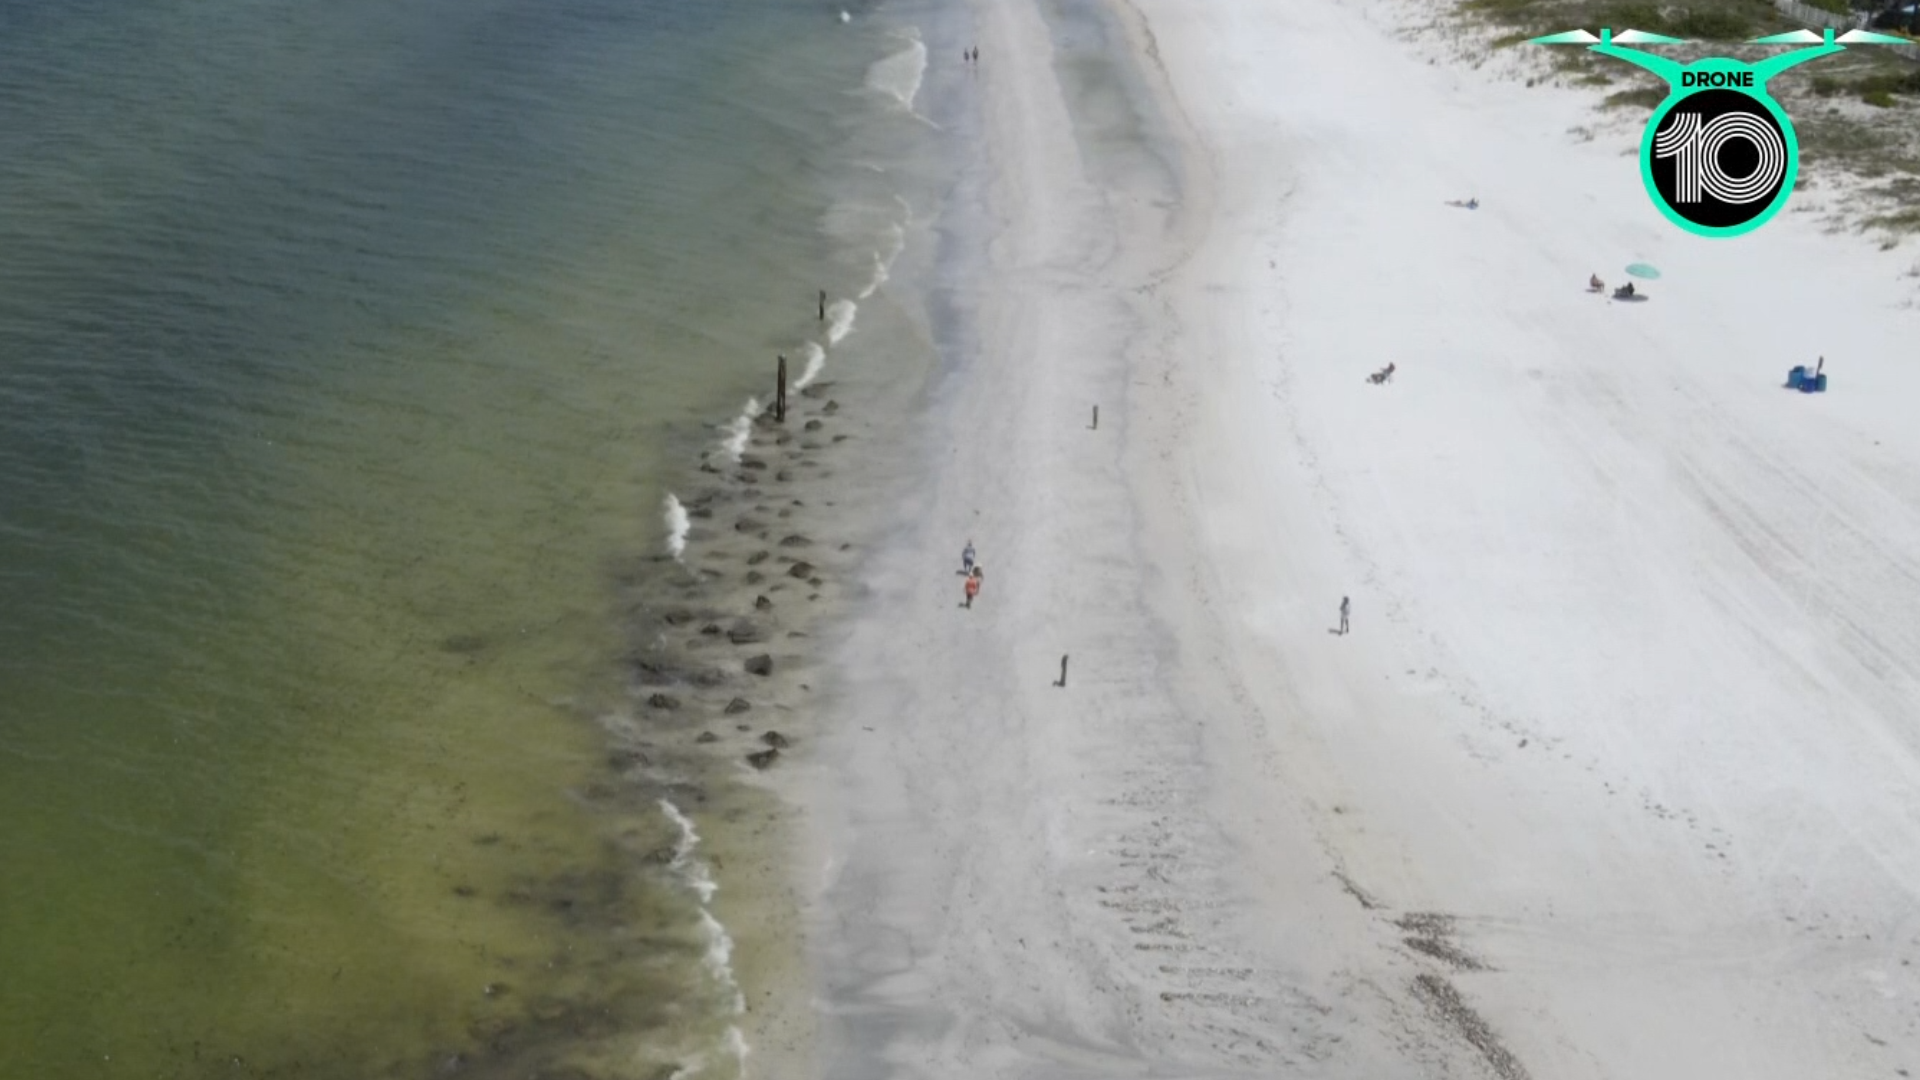 Red tide has severely impacted parts of the Tampa Bay area, causing millions of pounds of dead sea life to wash up along beaches.